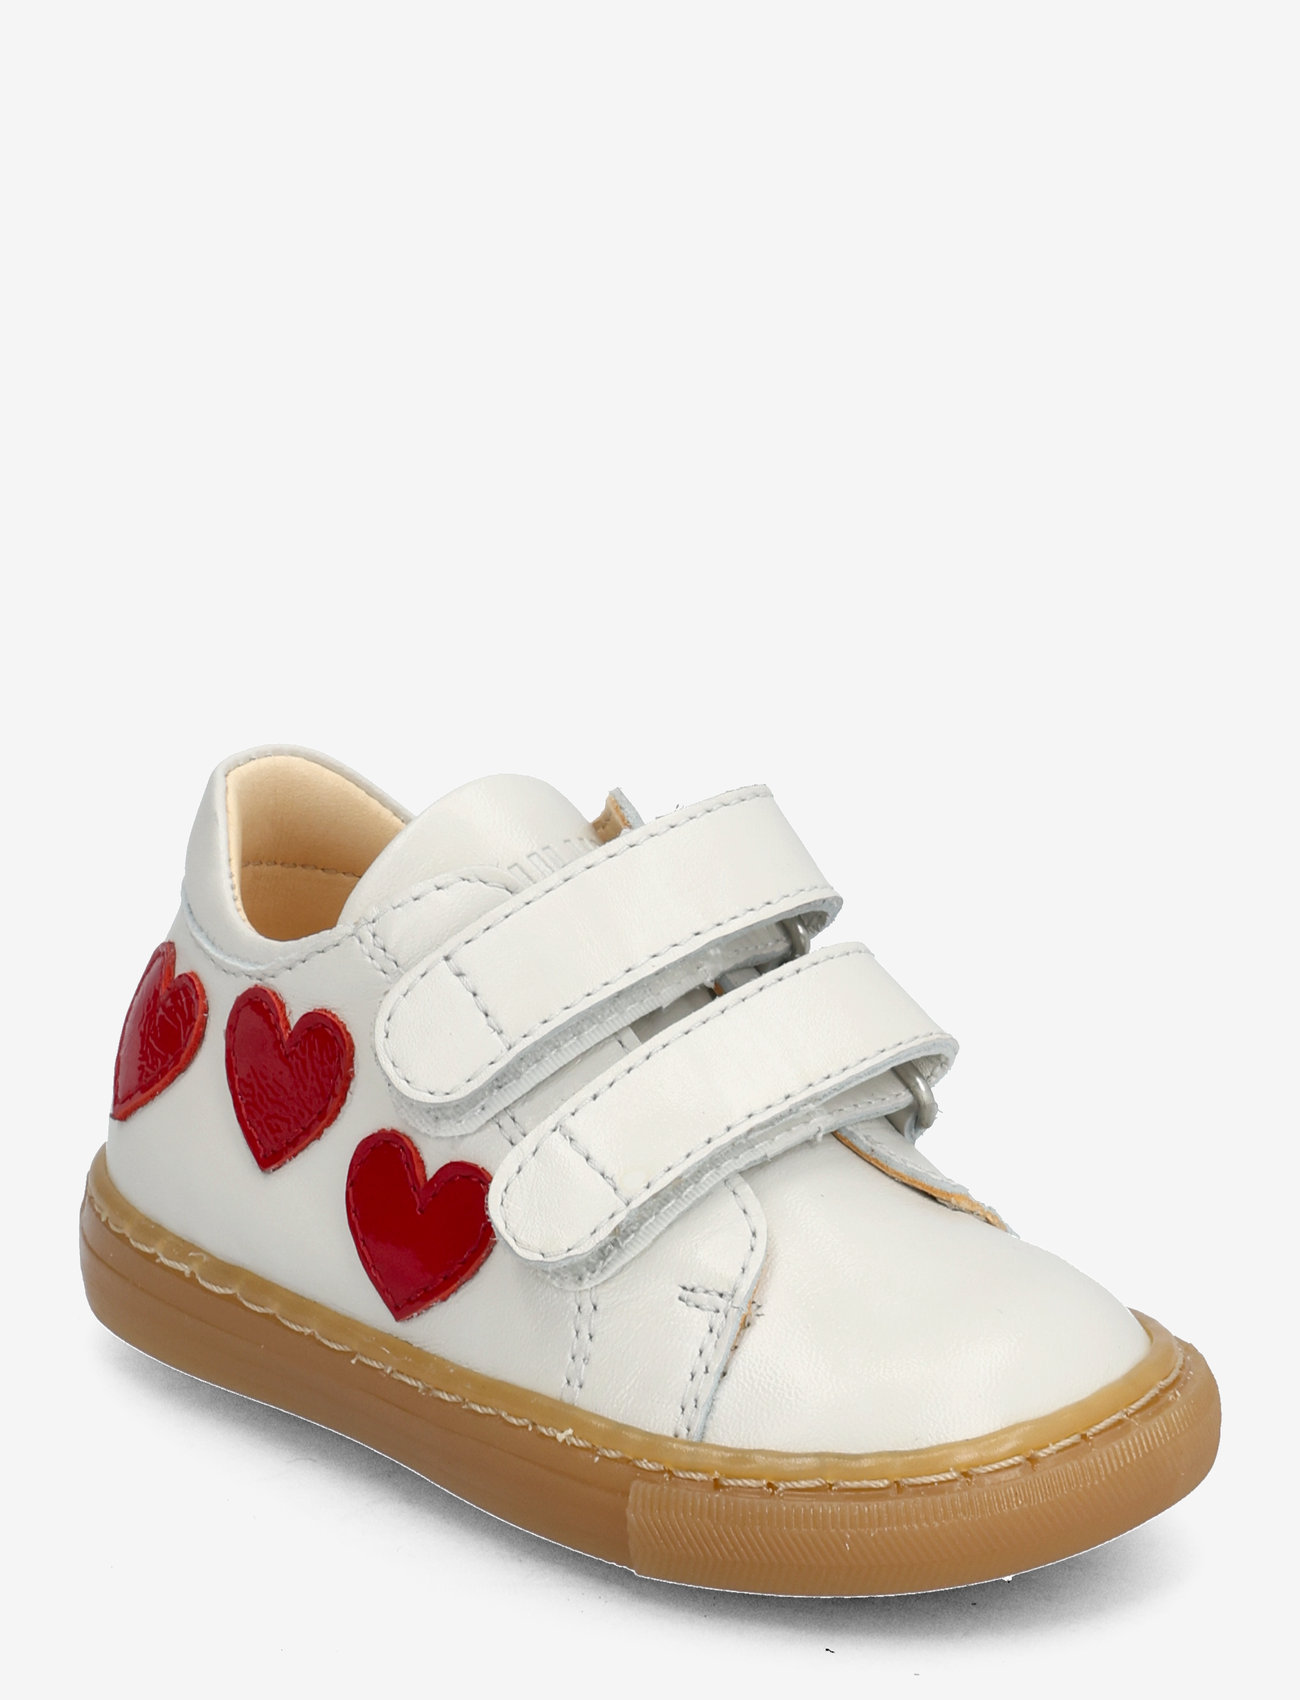 ANGULUS - Shoes - flat - with velcro - gode sommertilbud - 1493/a003 off white/hearts - 0